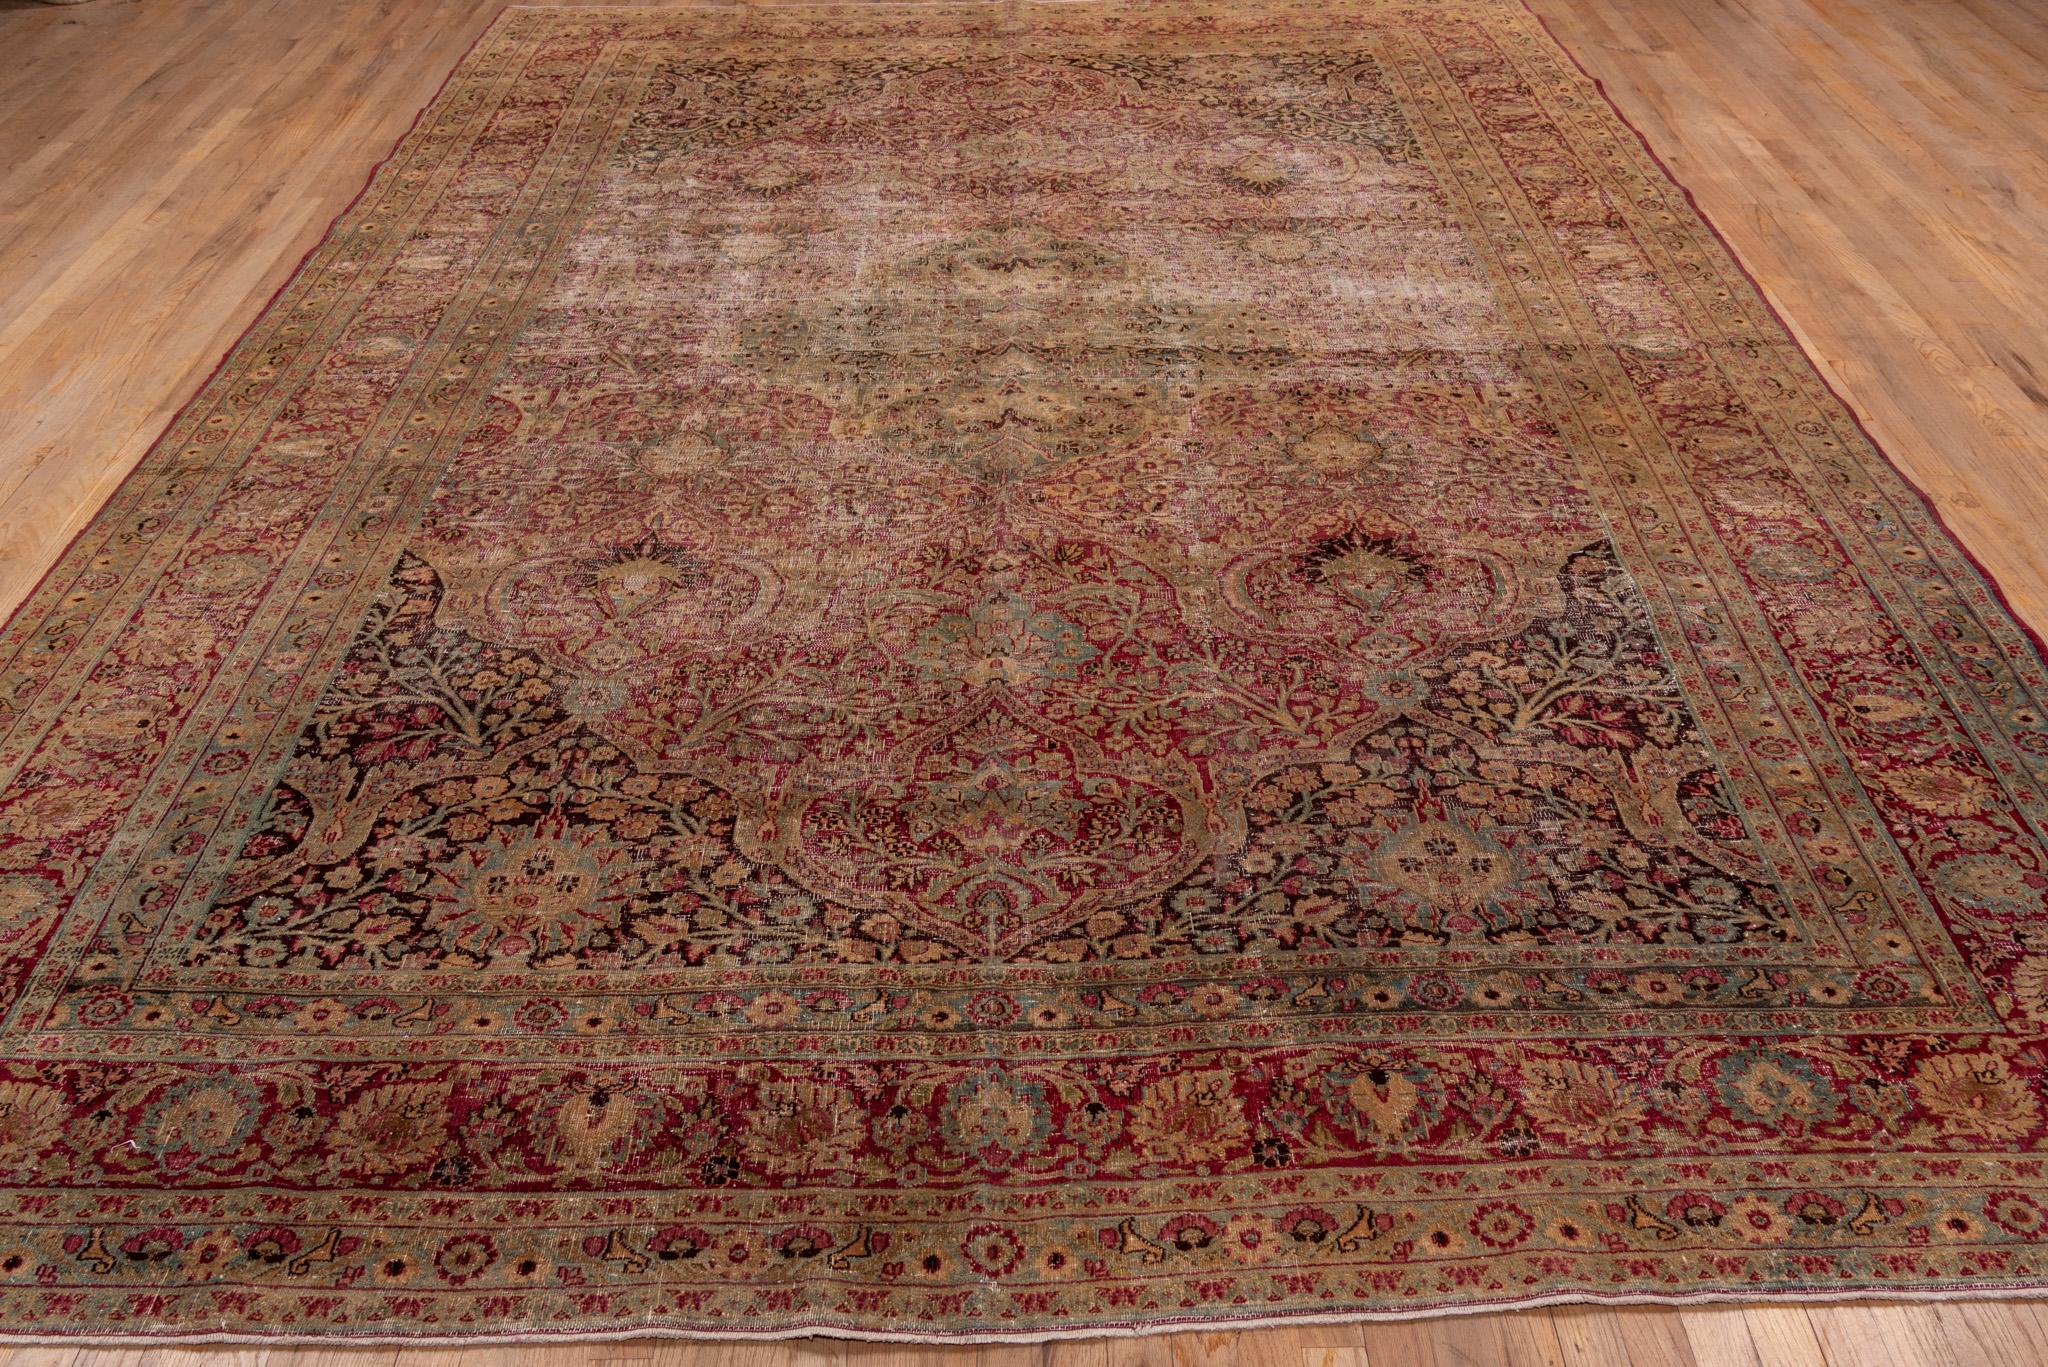 A Khorassan rug circa 1920. Hand knotted, made of 100% wool yarn.